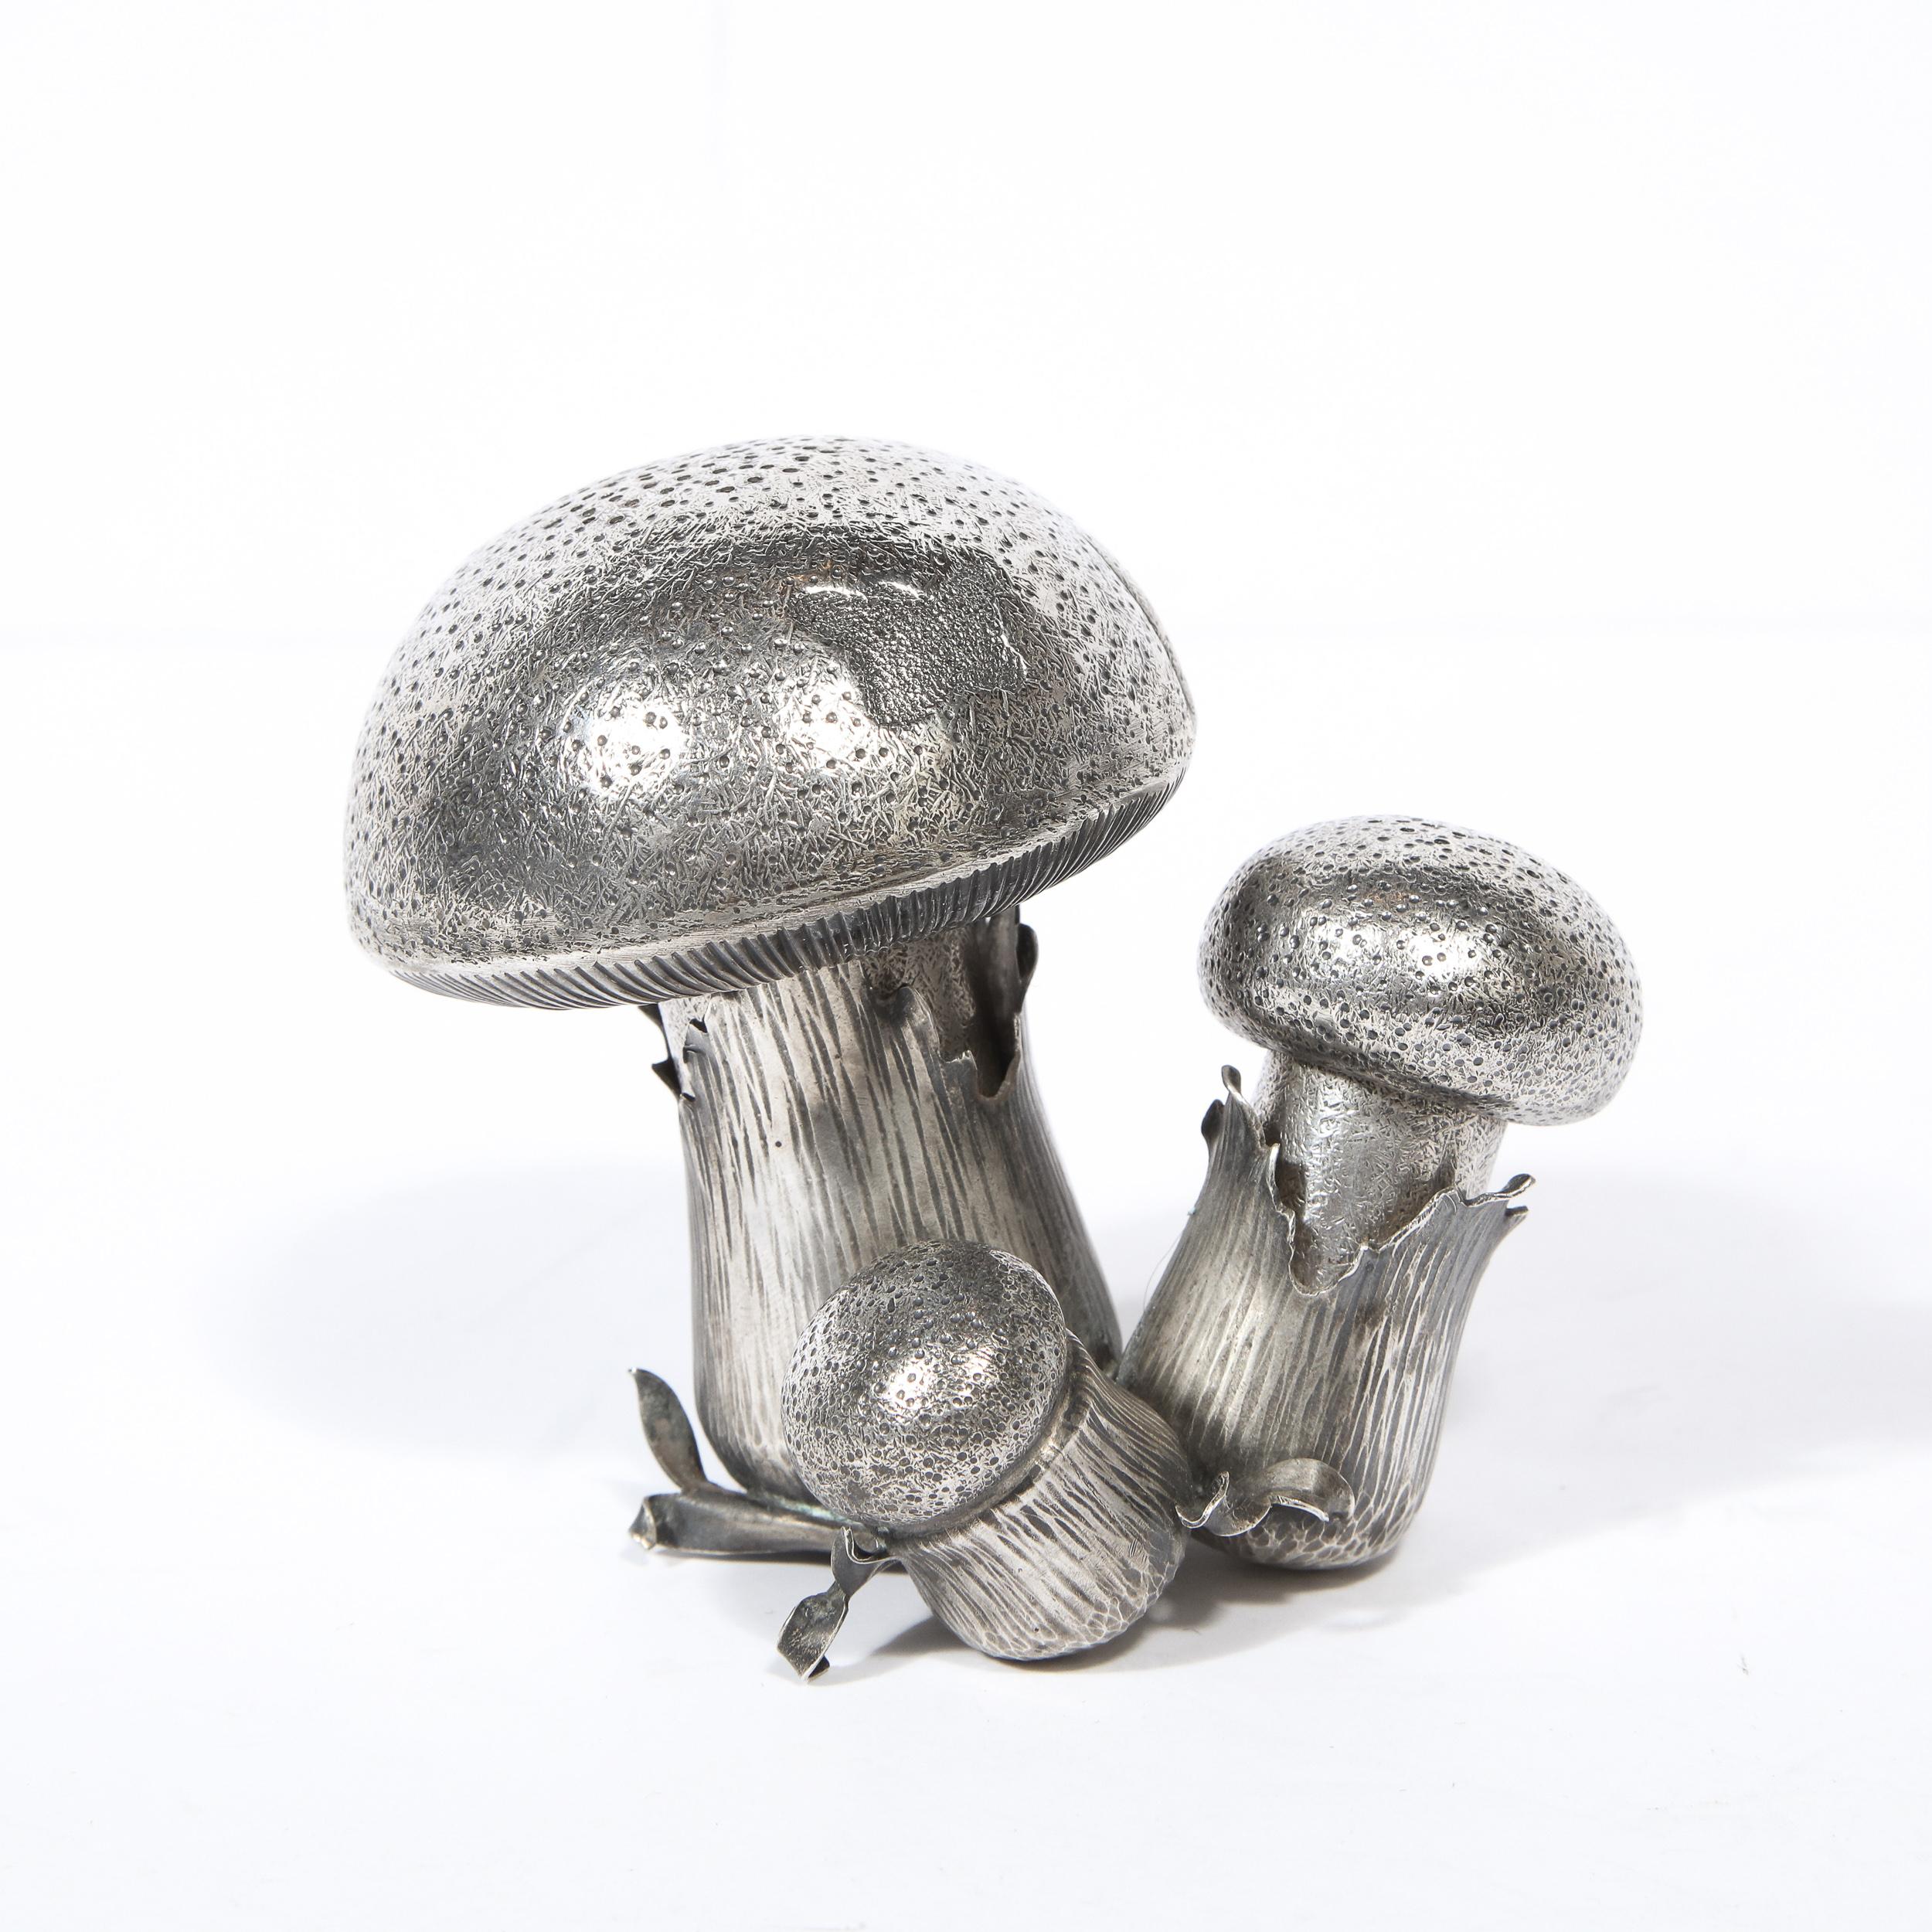 This elegant modernist salt shaker and pepper shaker were handcrafted and signed by Buccellati in Italy. The set features a cluster of three trumpet mushroom. The larger one represents the pepper shaker , while the medium sized one represents the